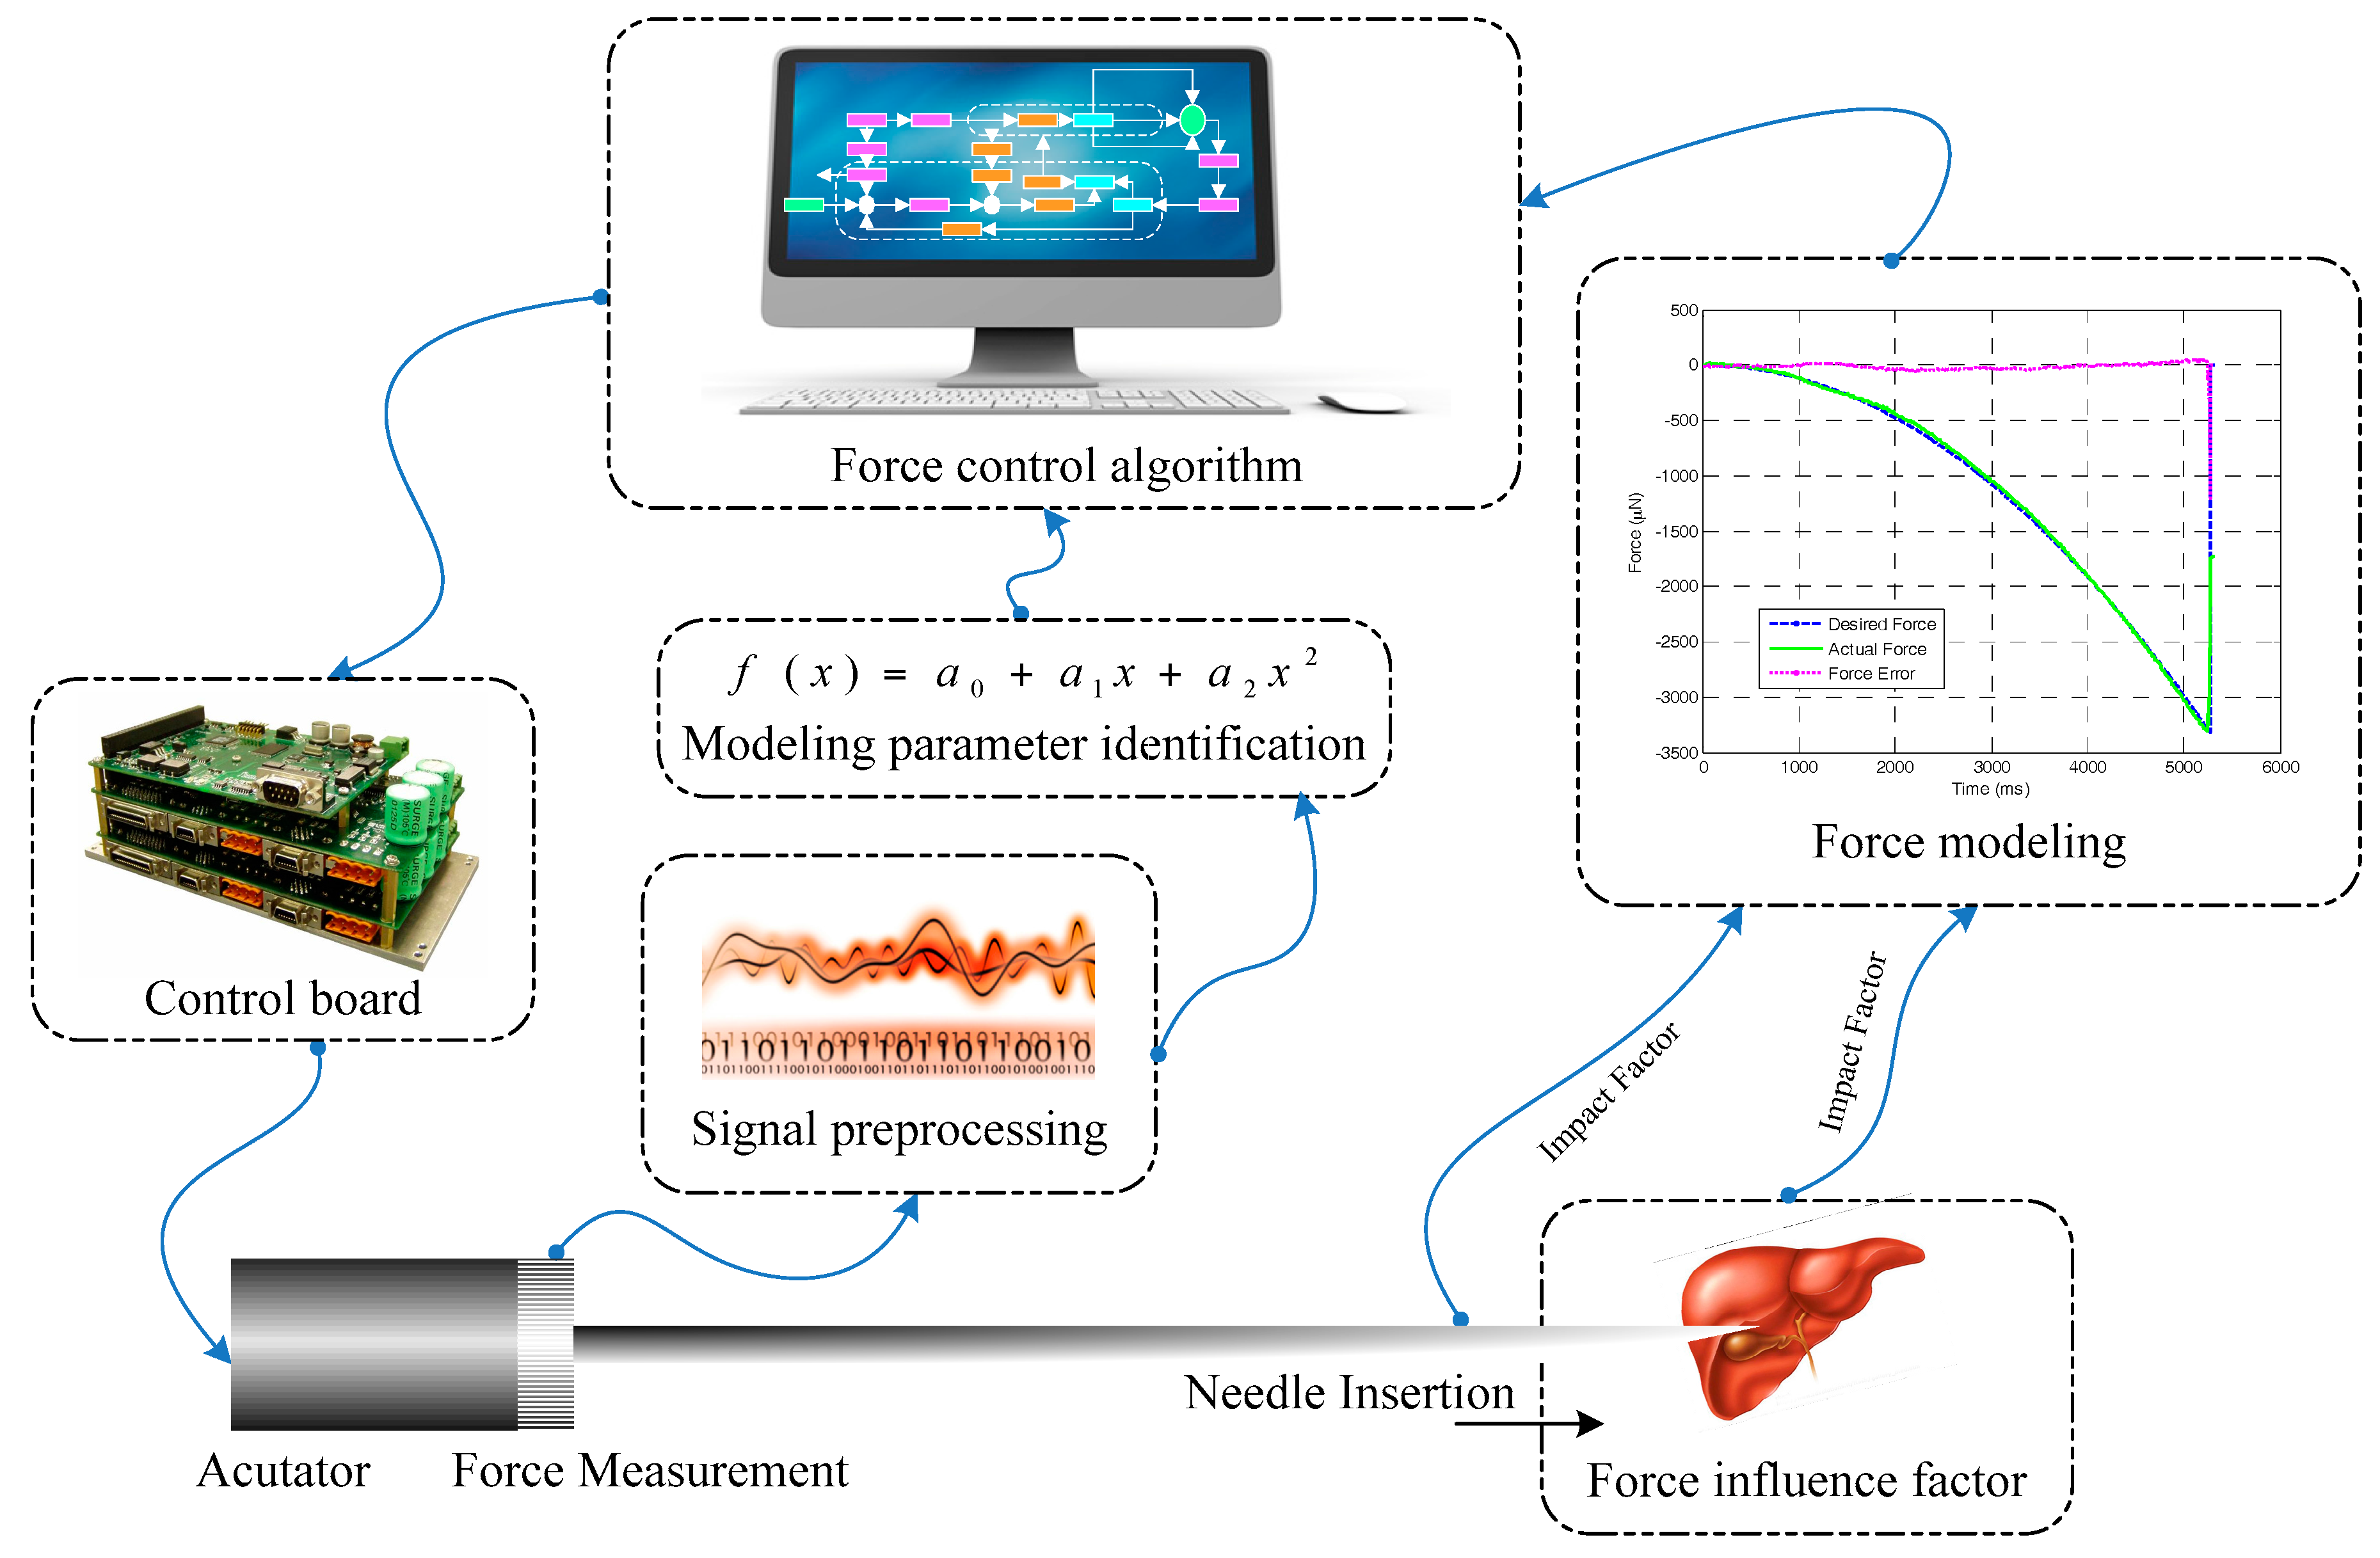 Sensors | Free Full-Text | Force Modeling, Identification, and Feedback  Control of Robot-Assisted Needle Insertion: A Survey of the Literature